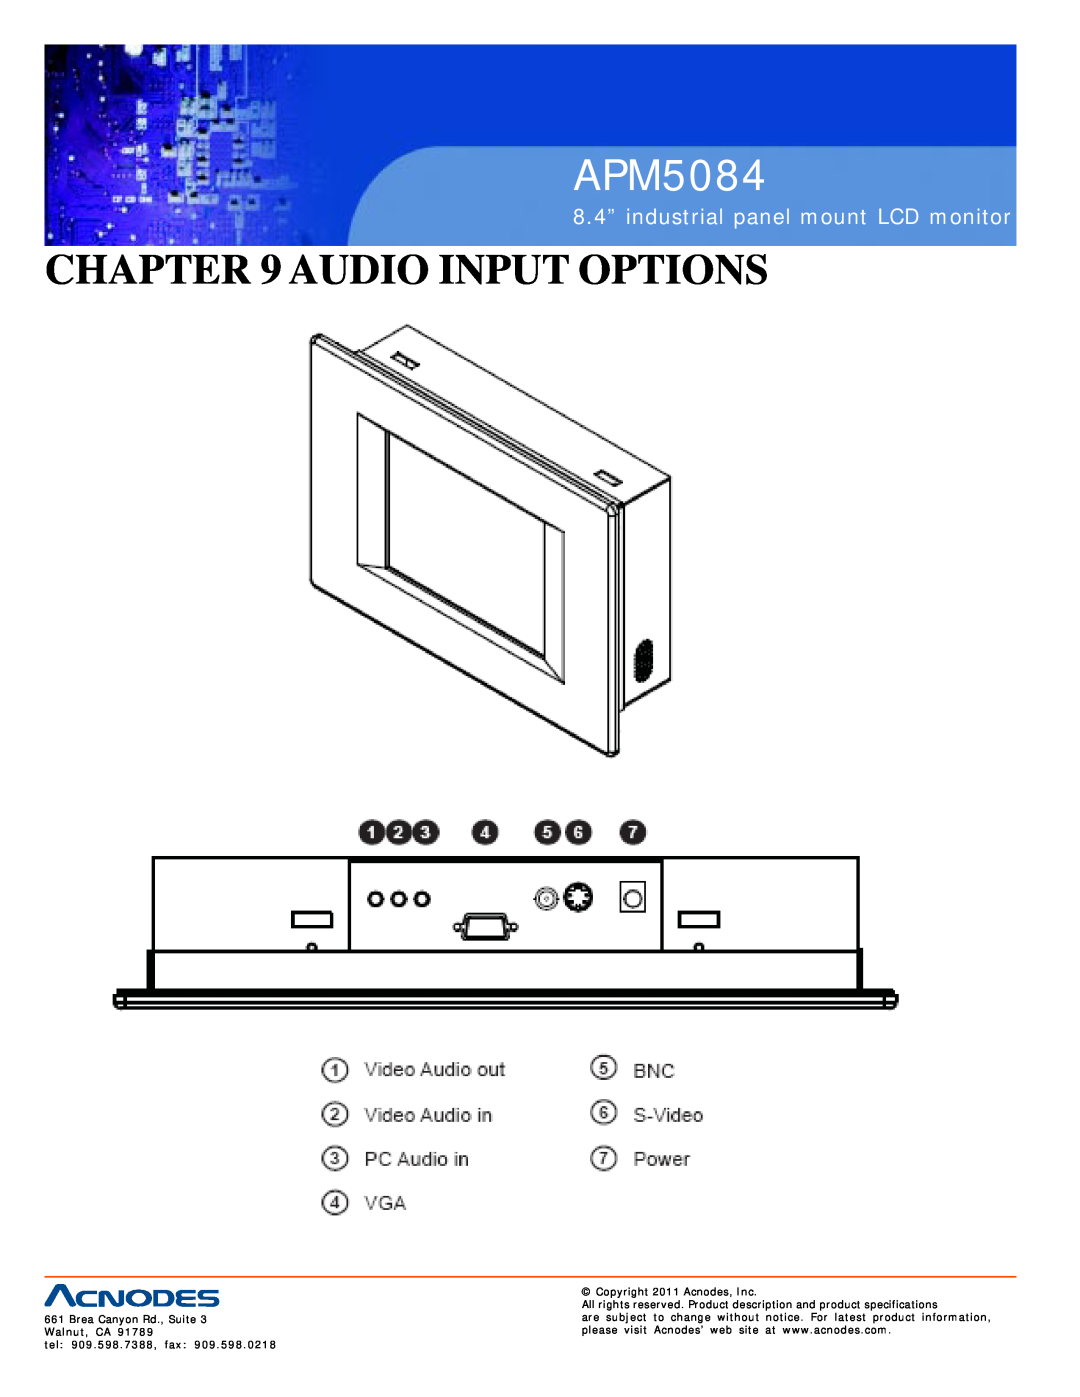 Acnodes APM5084 user manual Audio Input Options, 8.4” industrial panel mount LCD monitor, Copyright 2011 Acnodes, Inc 